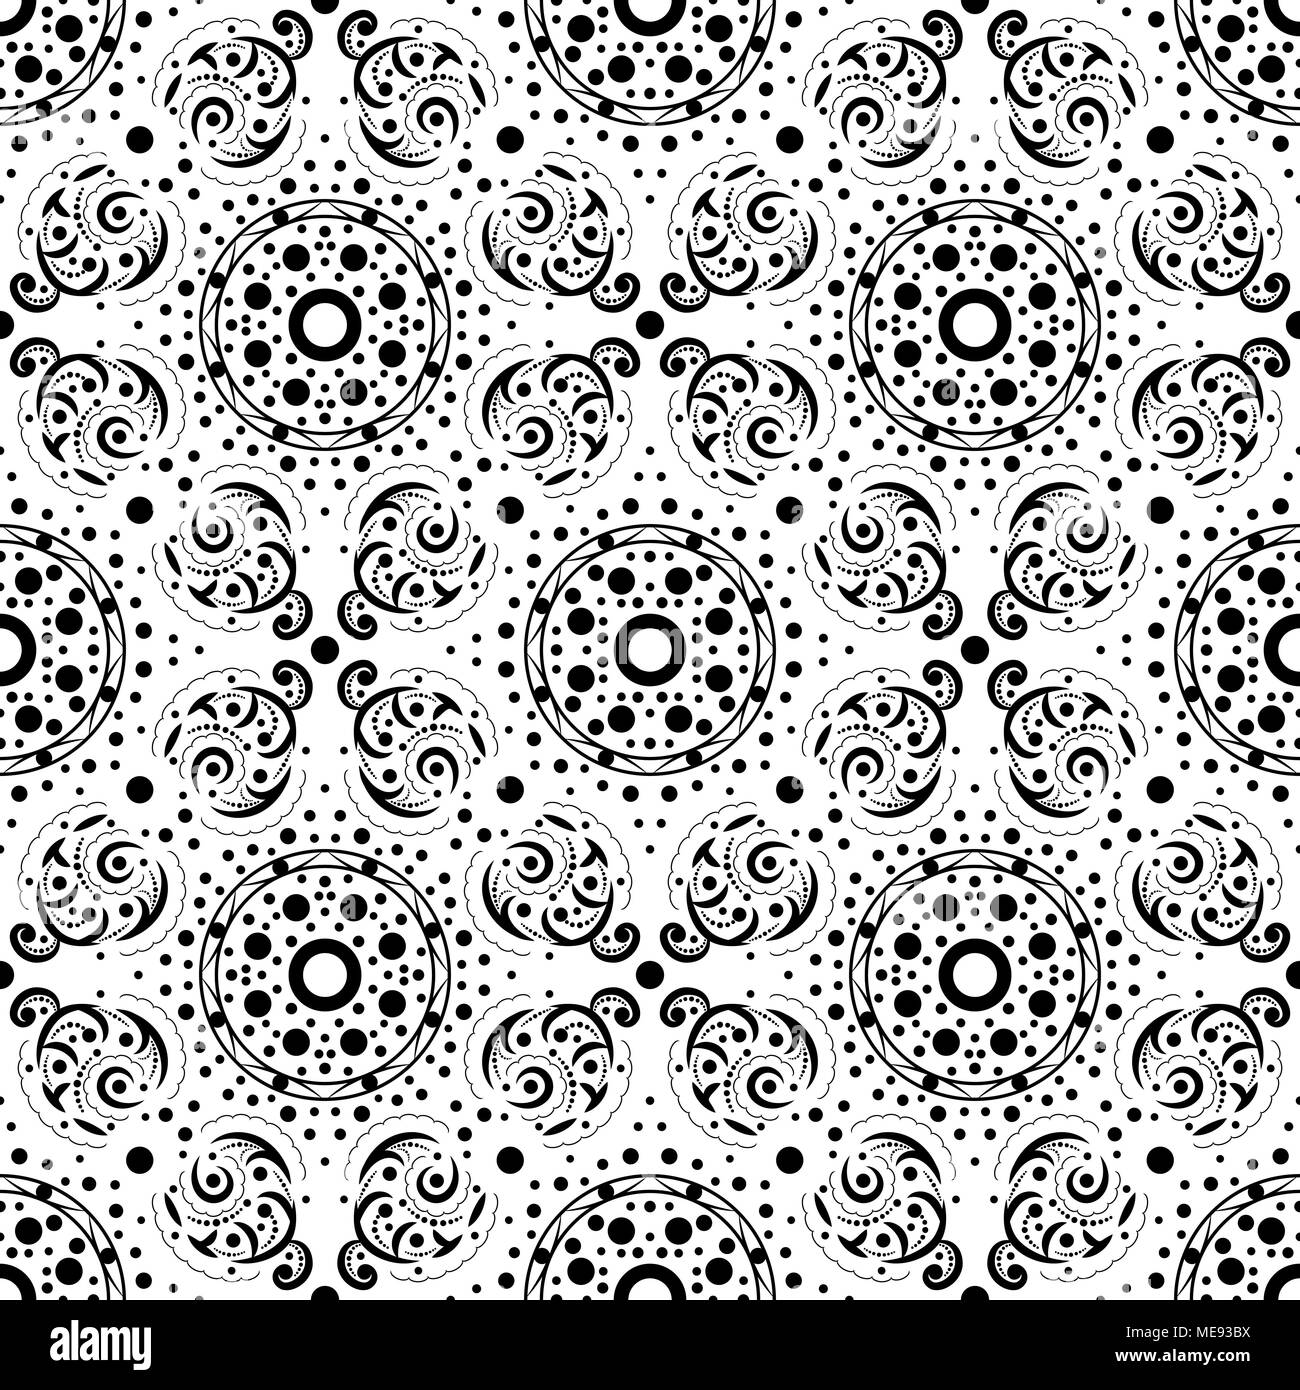 Seamless abstract pattern in black and white. Stock Vector